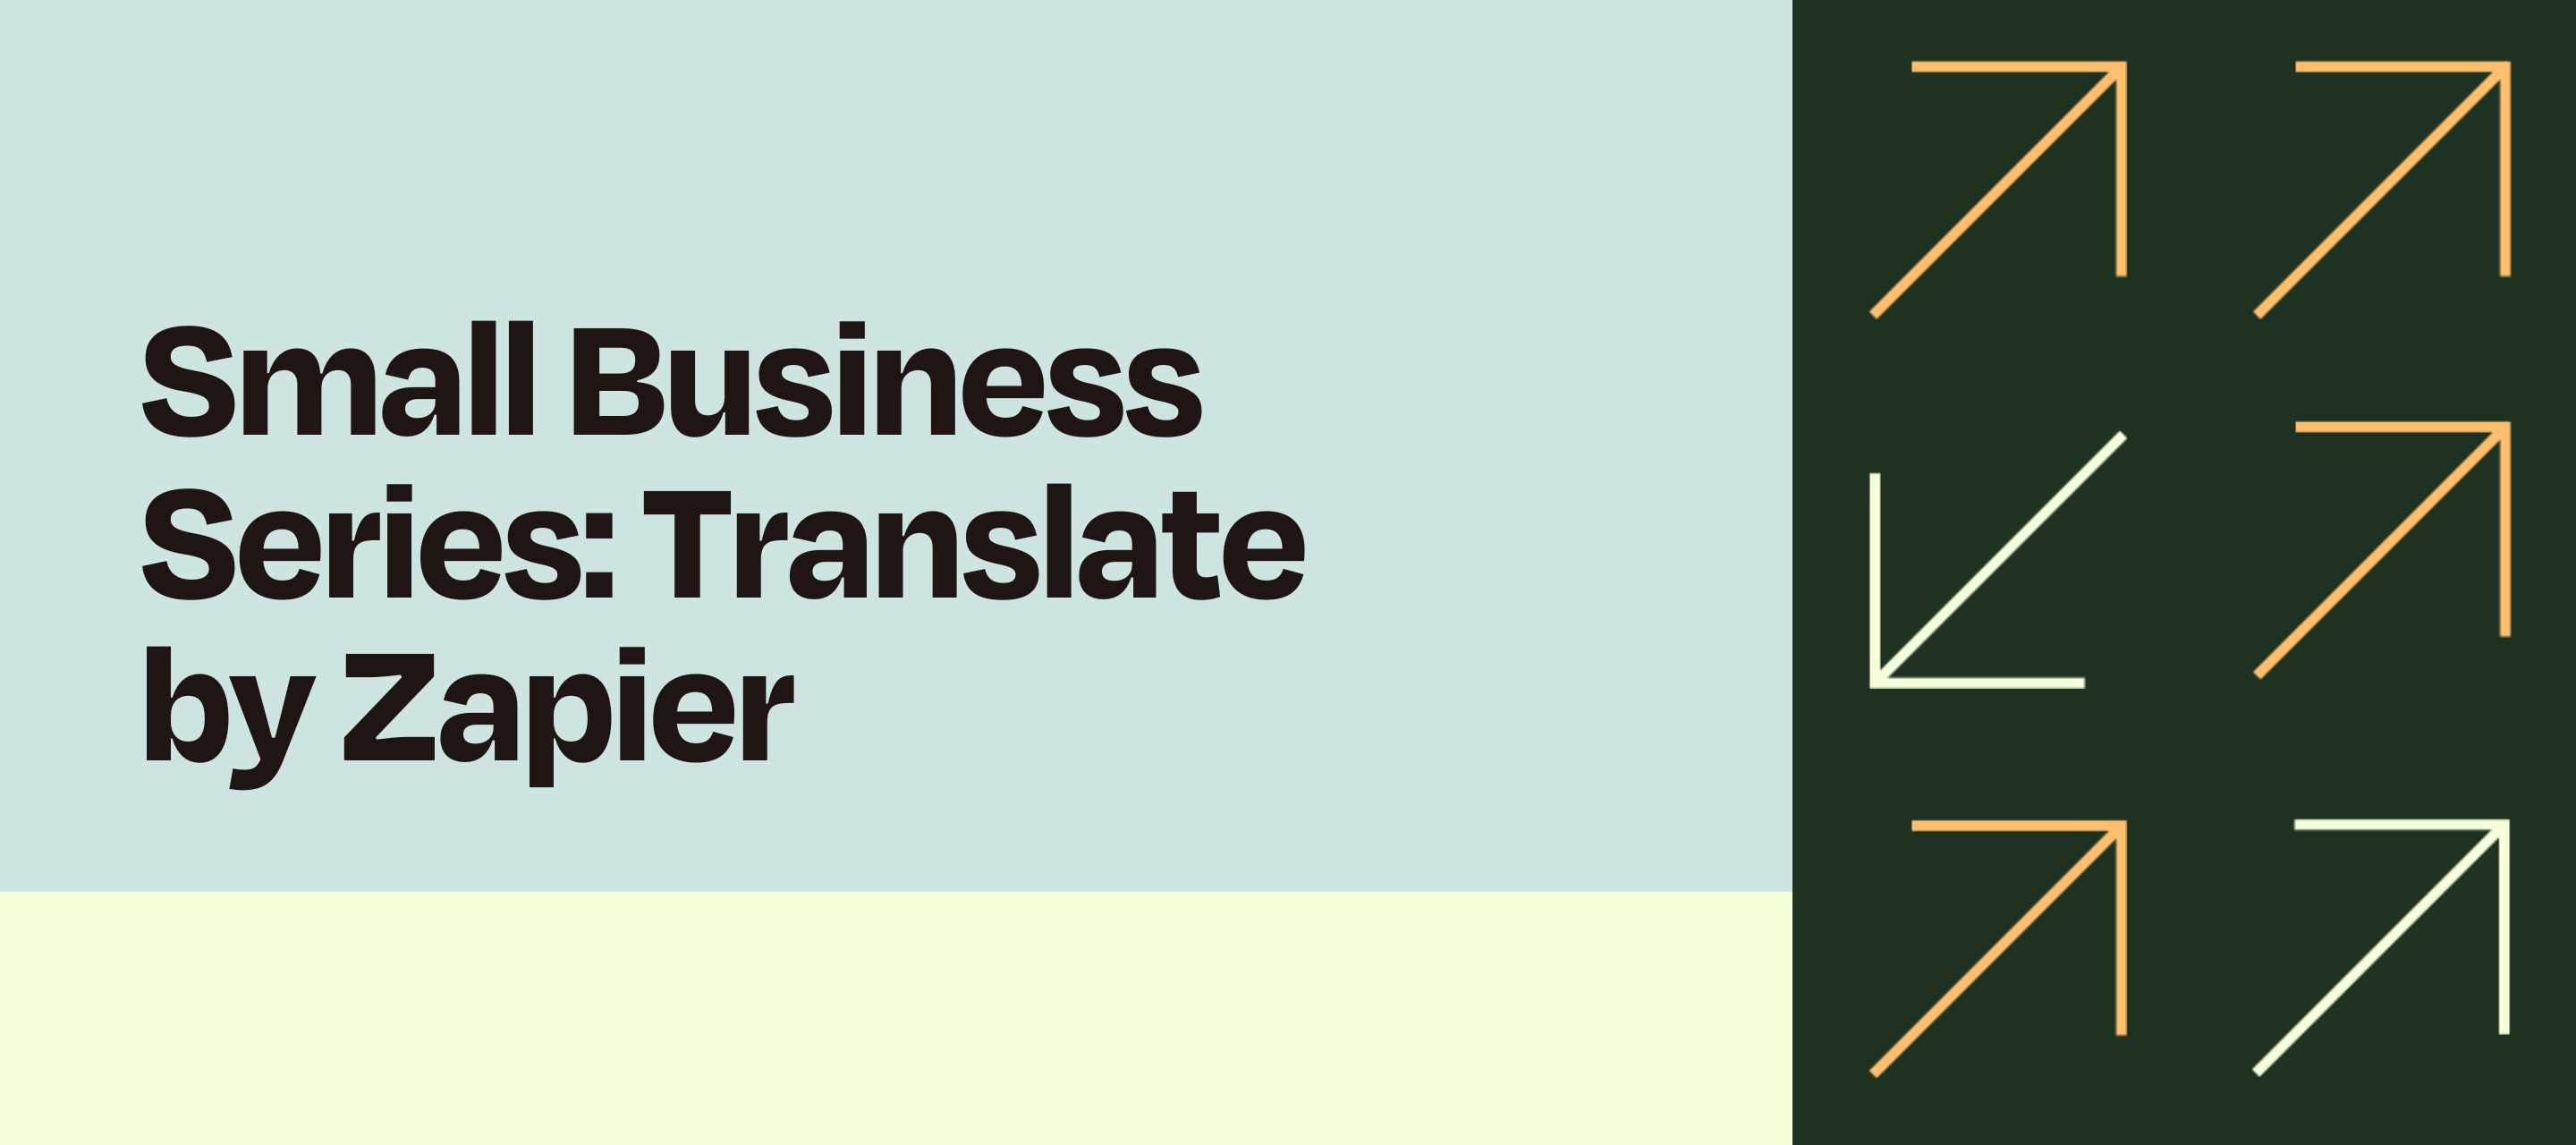 Small Business Series: Translate by Zapier